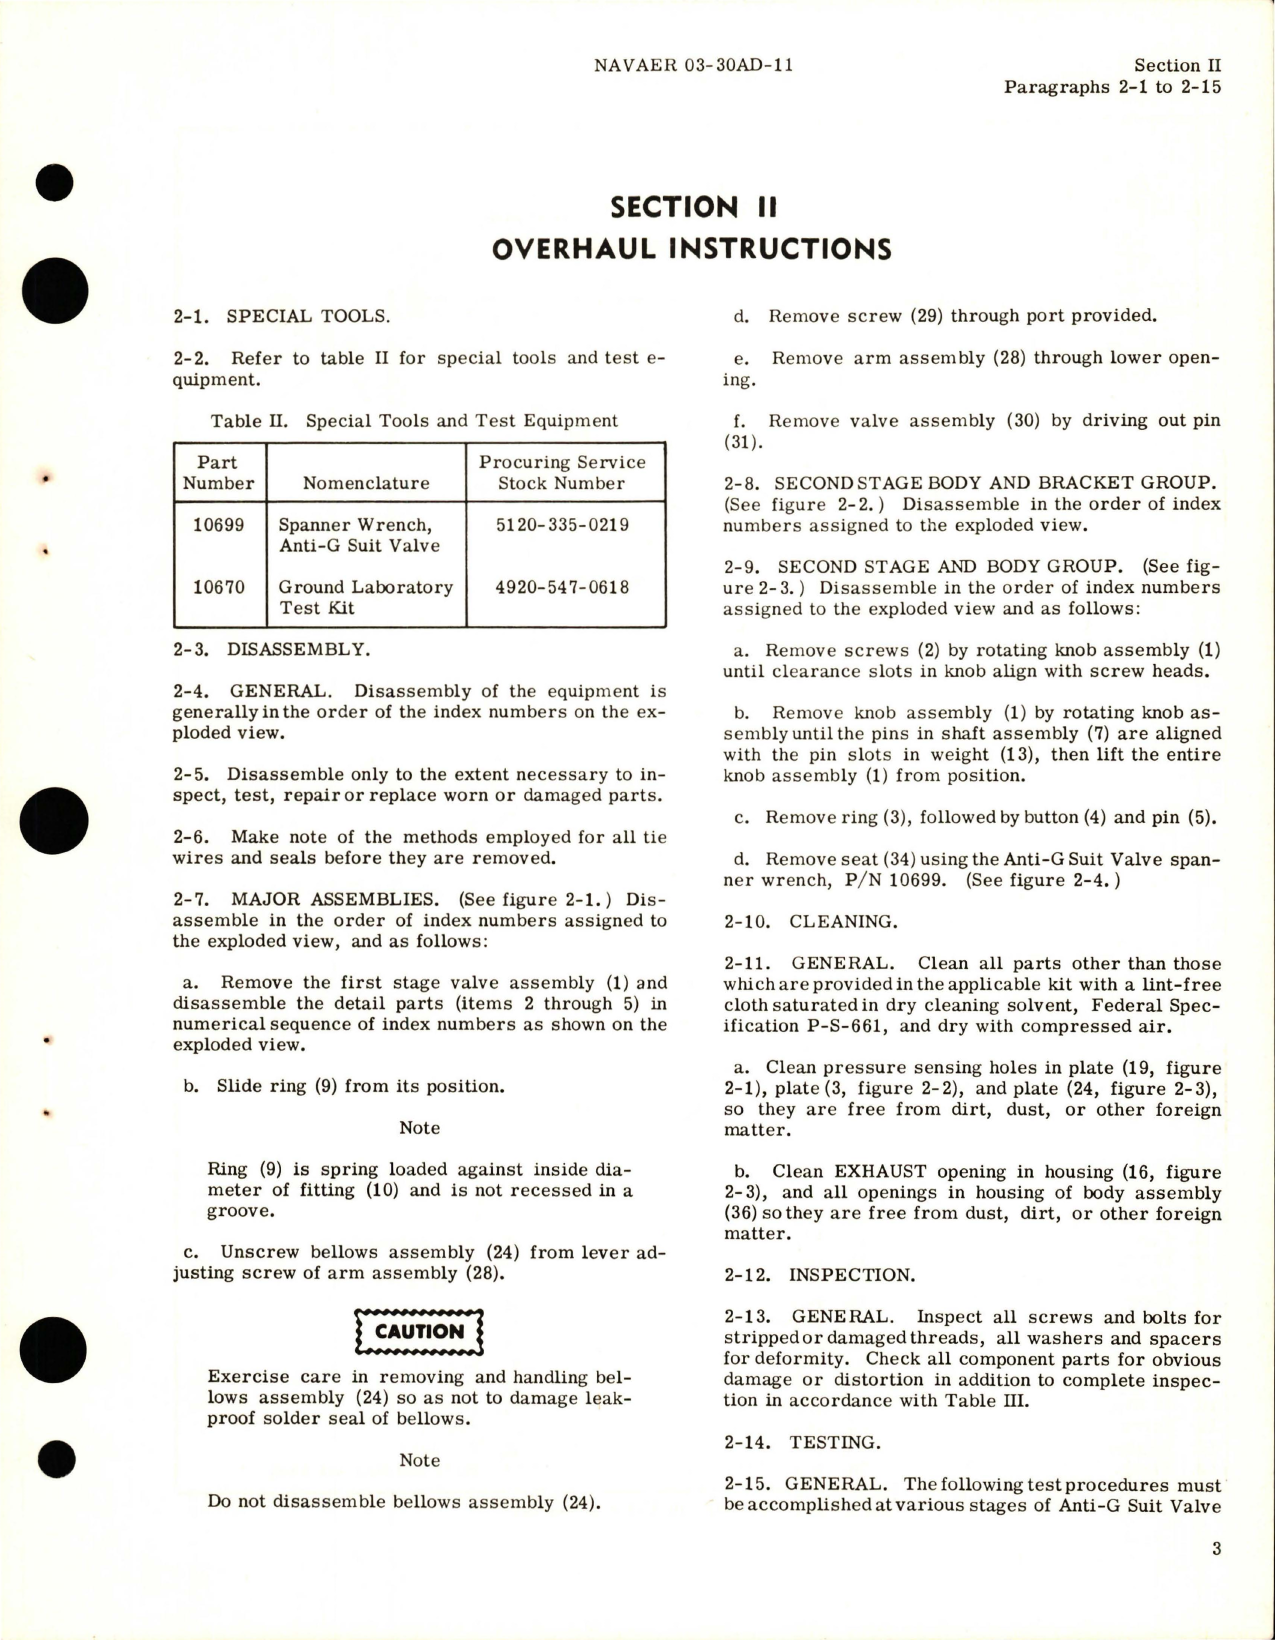 Sample page 7 from AirCorps Library document: Overhaul Instructions for Anti-G Suit Valve - Part 12800 